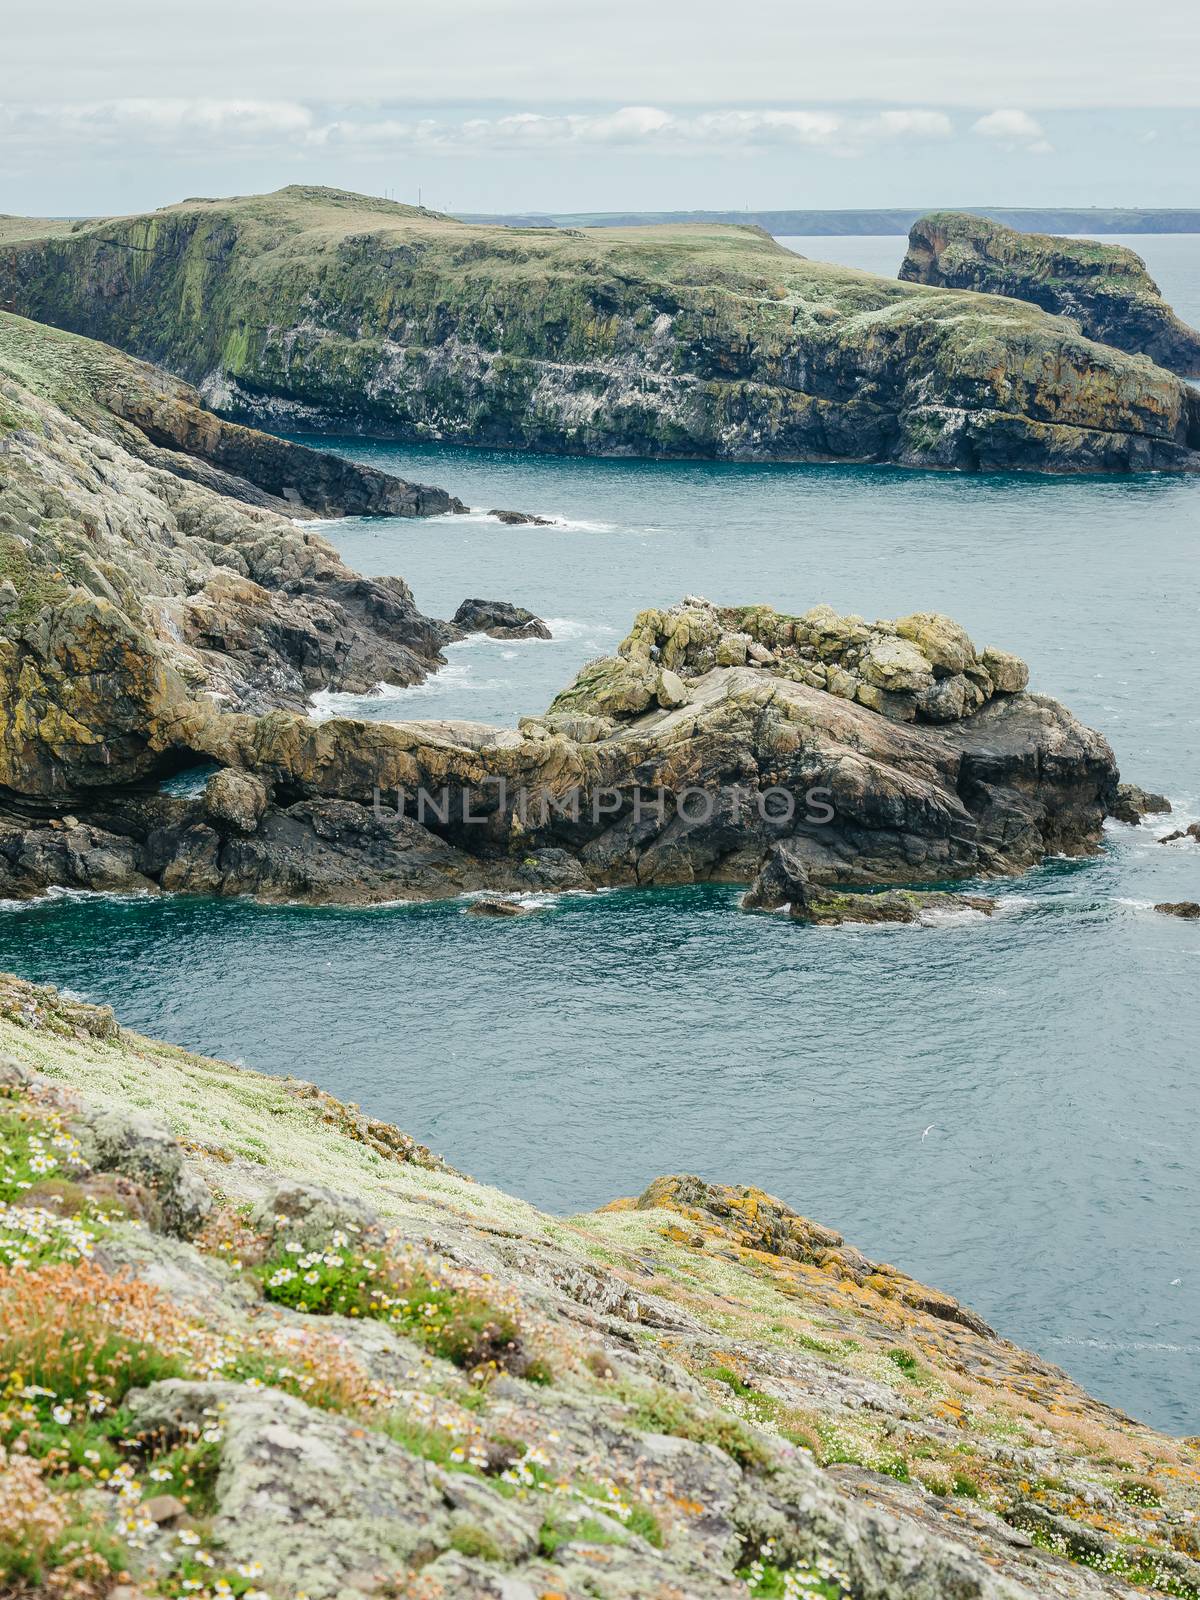 Stunning view over the rocky coastline of Skomer Island marine nature reserve on a sunny summer day - Pembrokeshire West Wales United Kingdom.